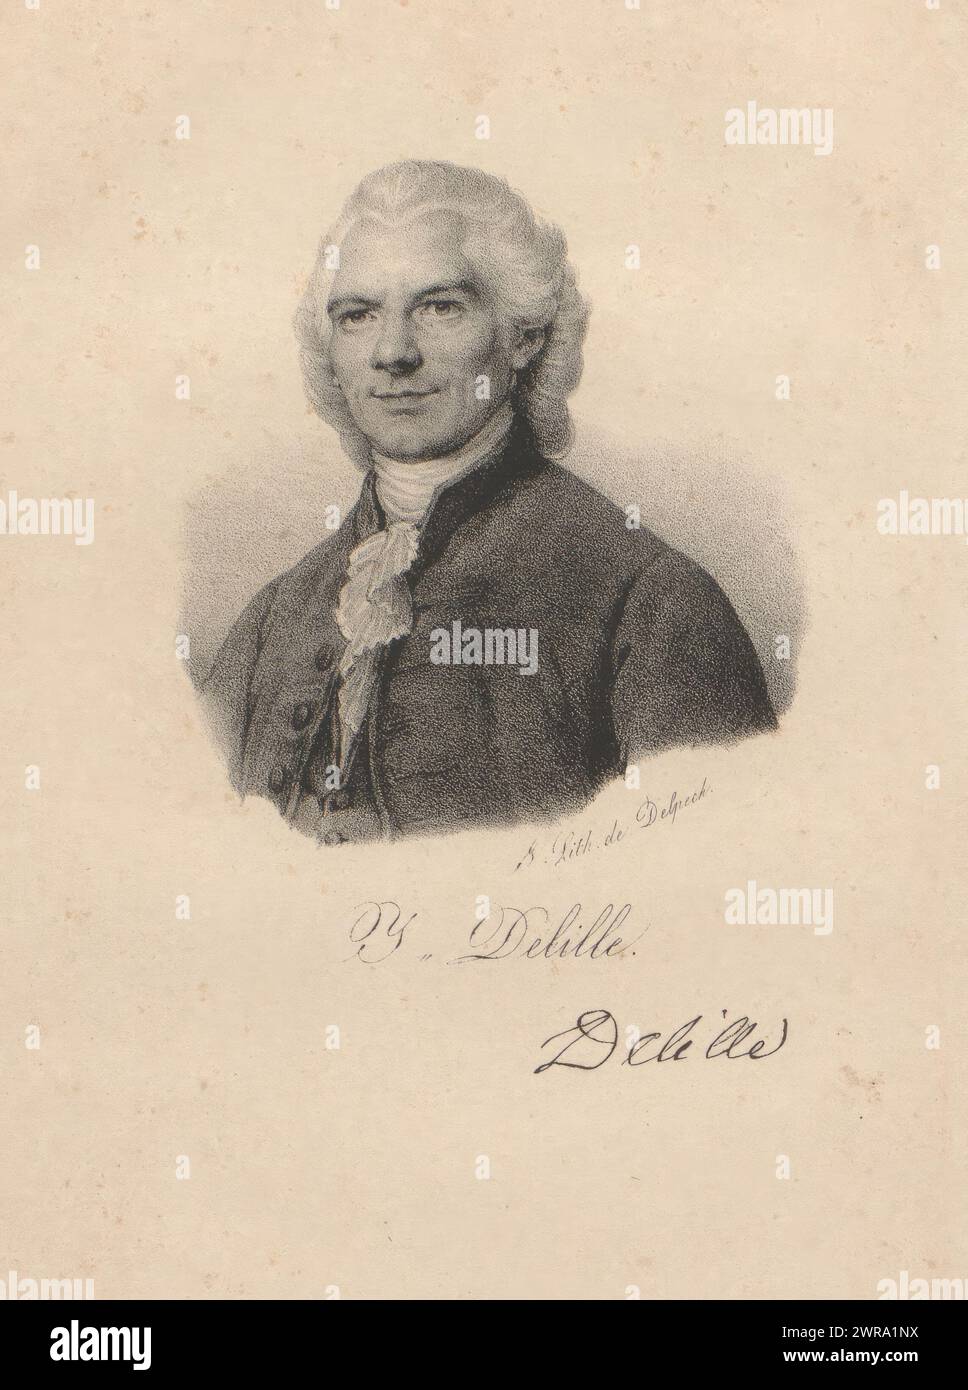 Portrait of Jacques Delille, J. Delille (title on object), print maker: anonymous, printer: veuve Delpech (Naudet), Paris, in or after 1818 - in or before 1842, paper, height 266 mm × width 173 mm, print Stock Photo